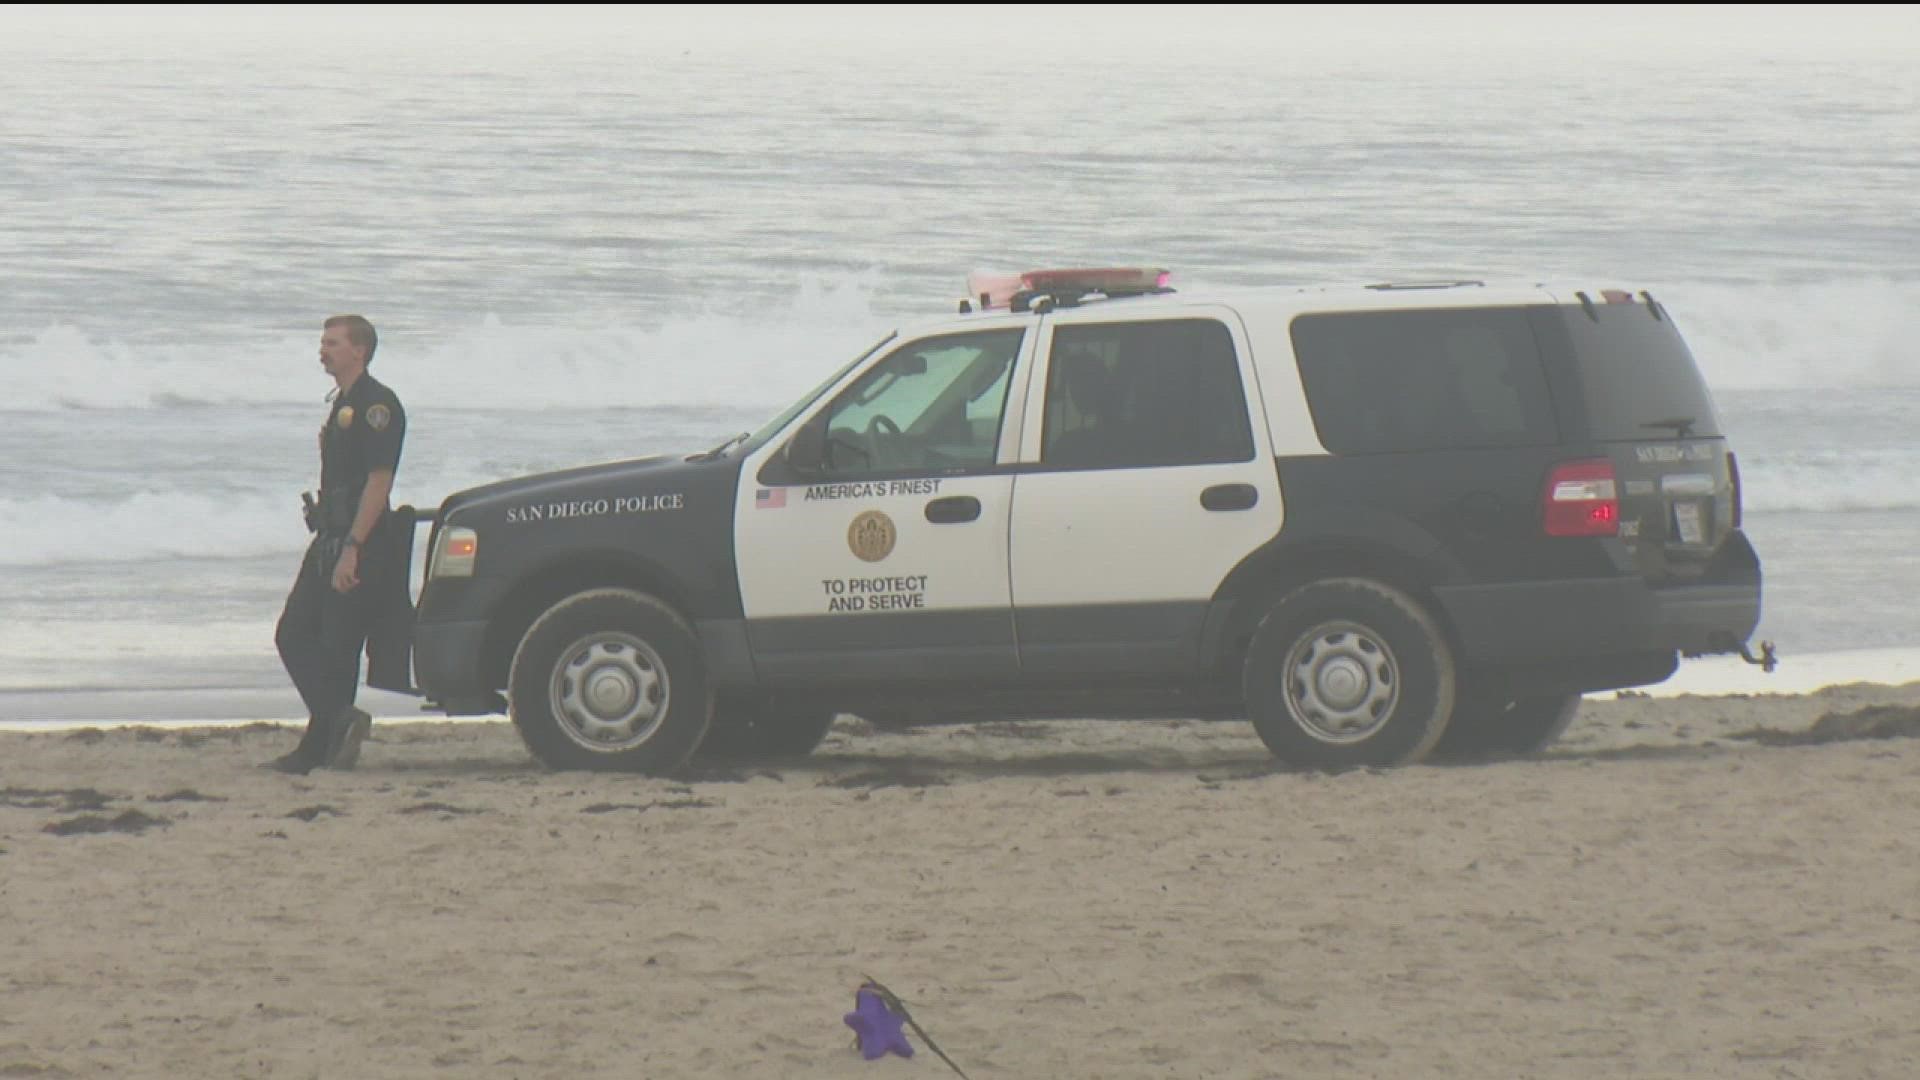 Police say people found a woman on the sand suffering from a gunshot wound around 12:30 a.m.